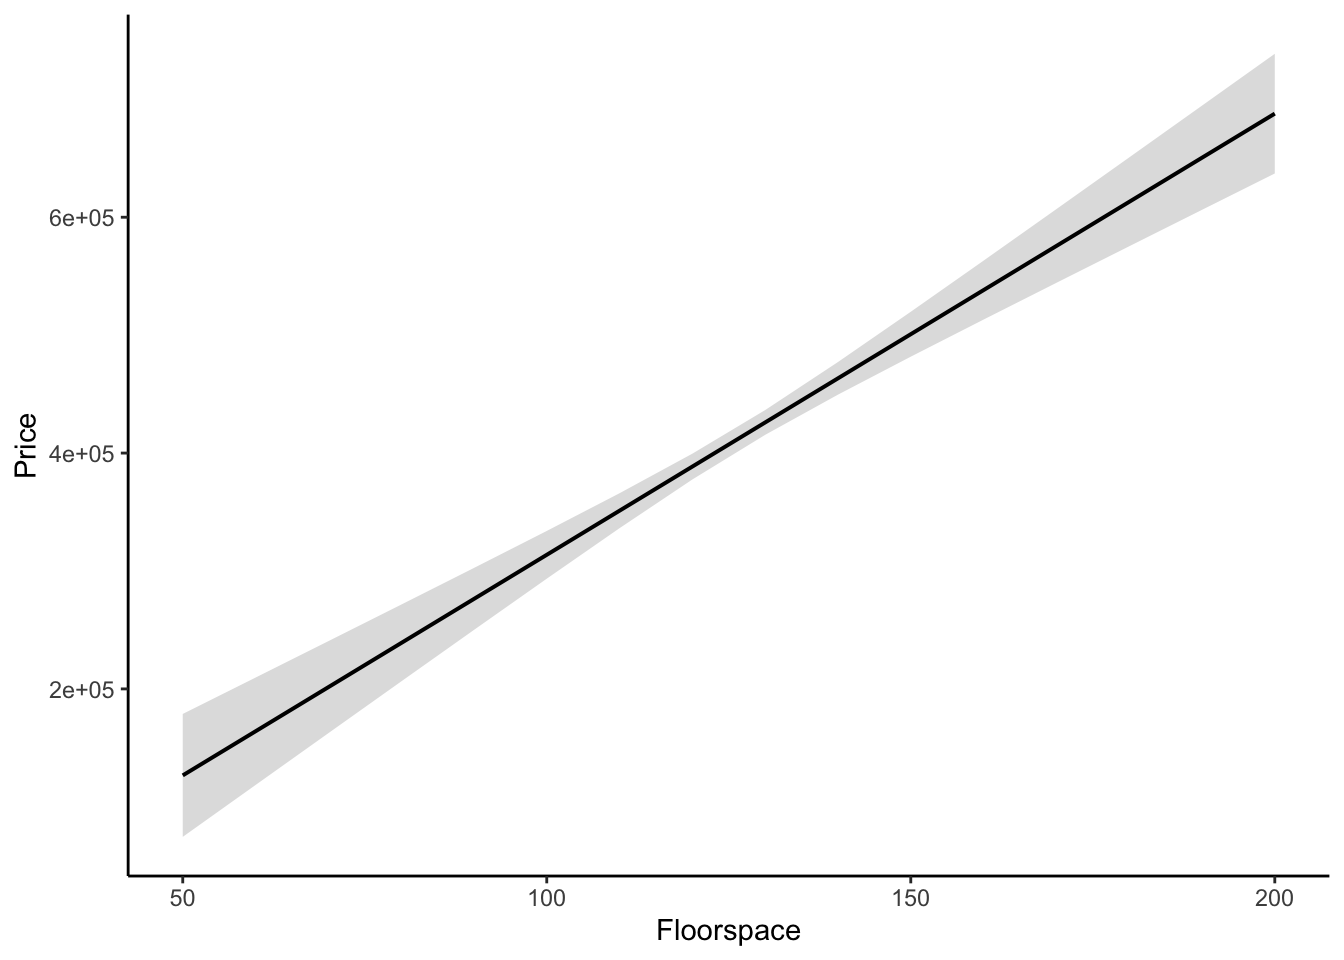 Marginal effect of floorspace on house price in a fictional dataset (95% confidence interval).